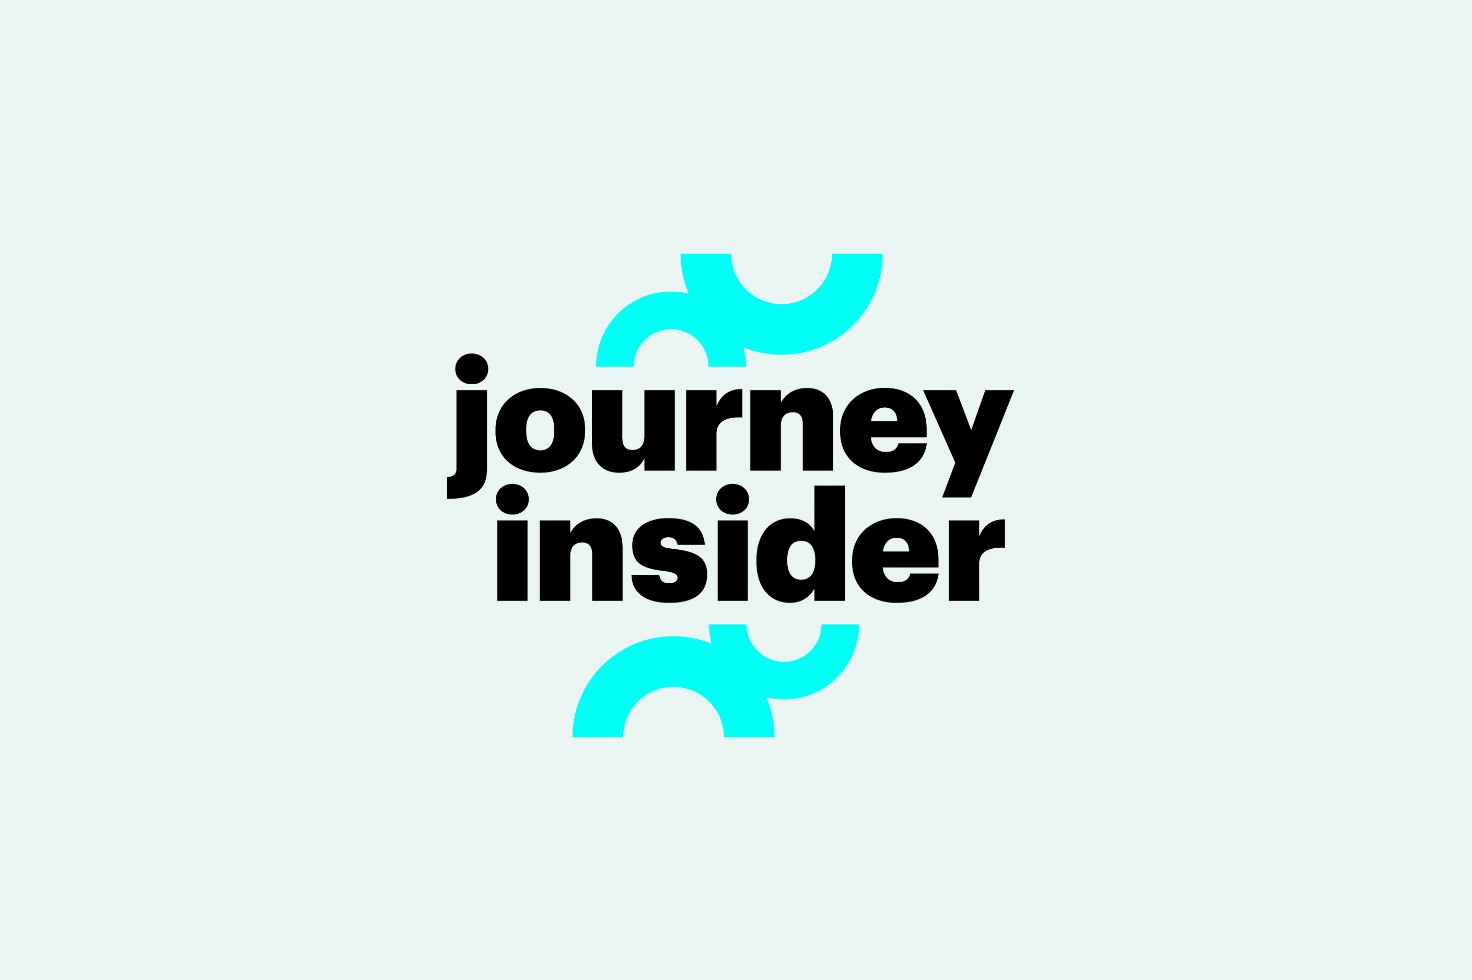 journey insider Maddy Apsey, SVP of Digital Investments 22Squared